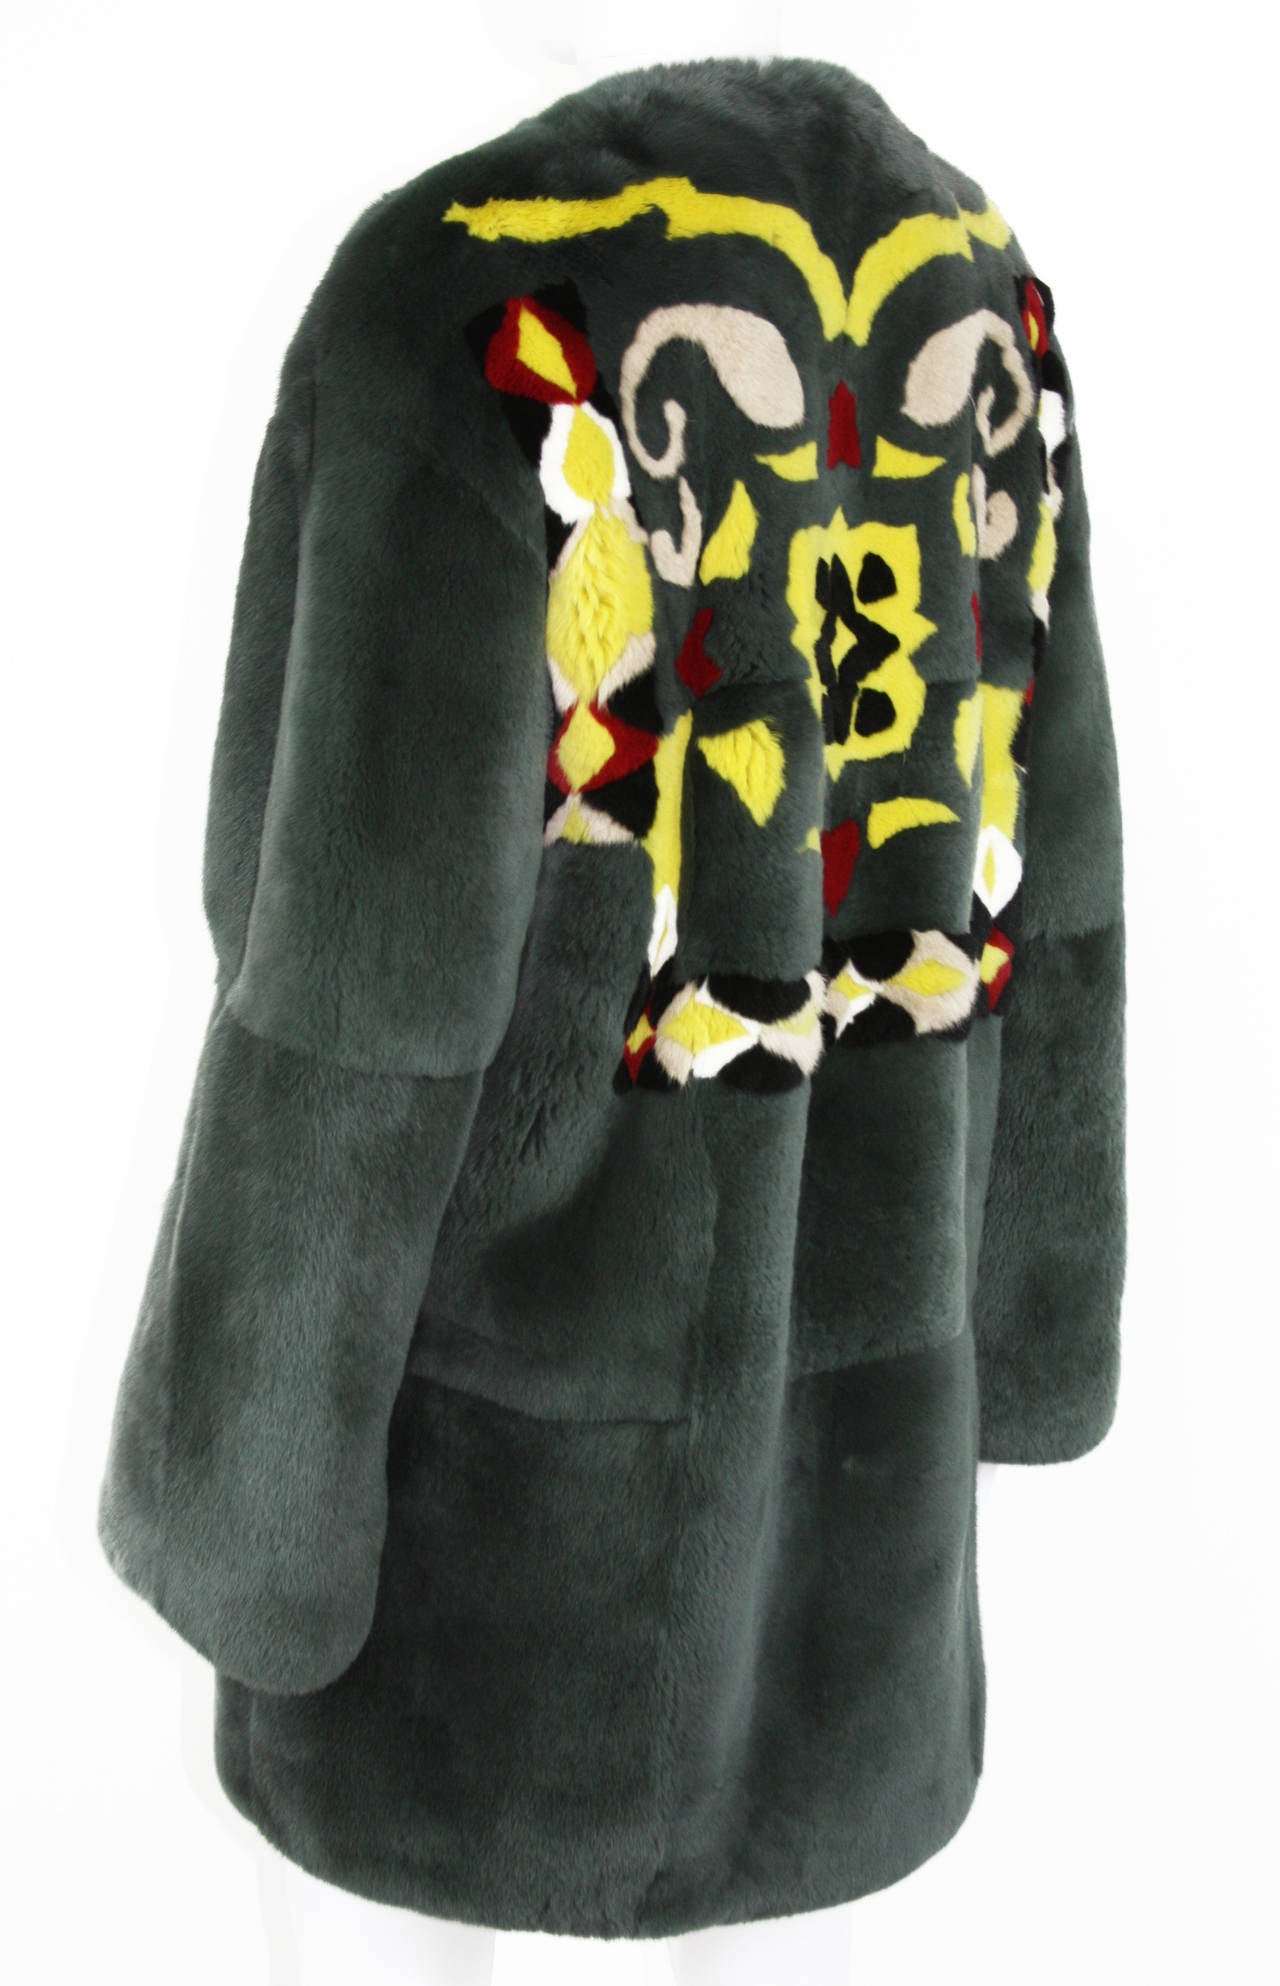 NEW ETRO RUNWAY FUR COAT 

ITALIAN SIZE 42 – US 6

100% LAPIN (RABBIT)

COLORS – GREEN/GRAY, YELLOW, BLACK, BEIGE, RED, WHITE

ABSTRACT DESIGN AT BACK

ZIPPER CLOSURE

TWO FRONT POCKETS

FULLY LINED
 
MEASUREMENTS FLAT: LENGTH - 33